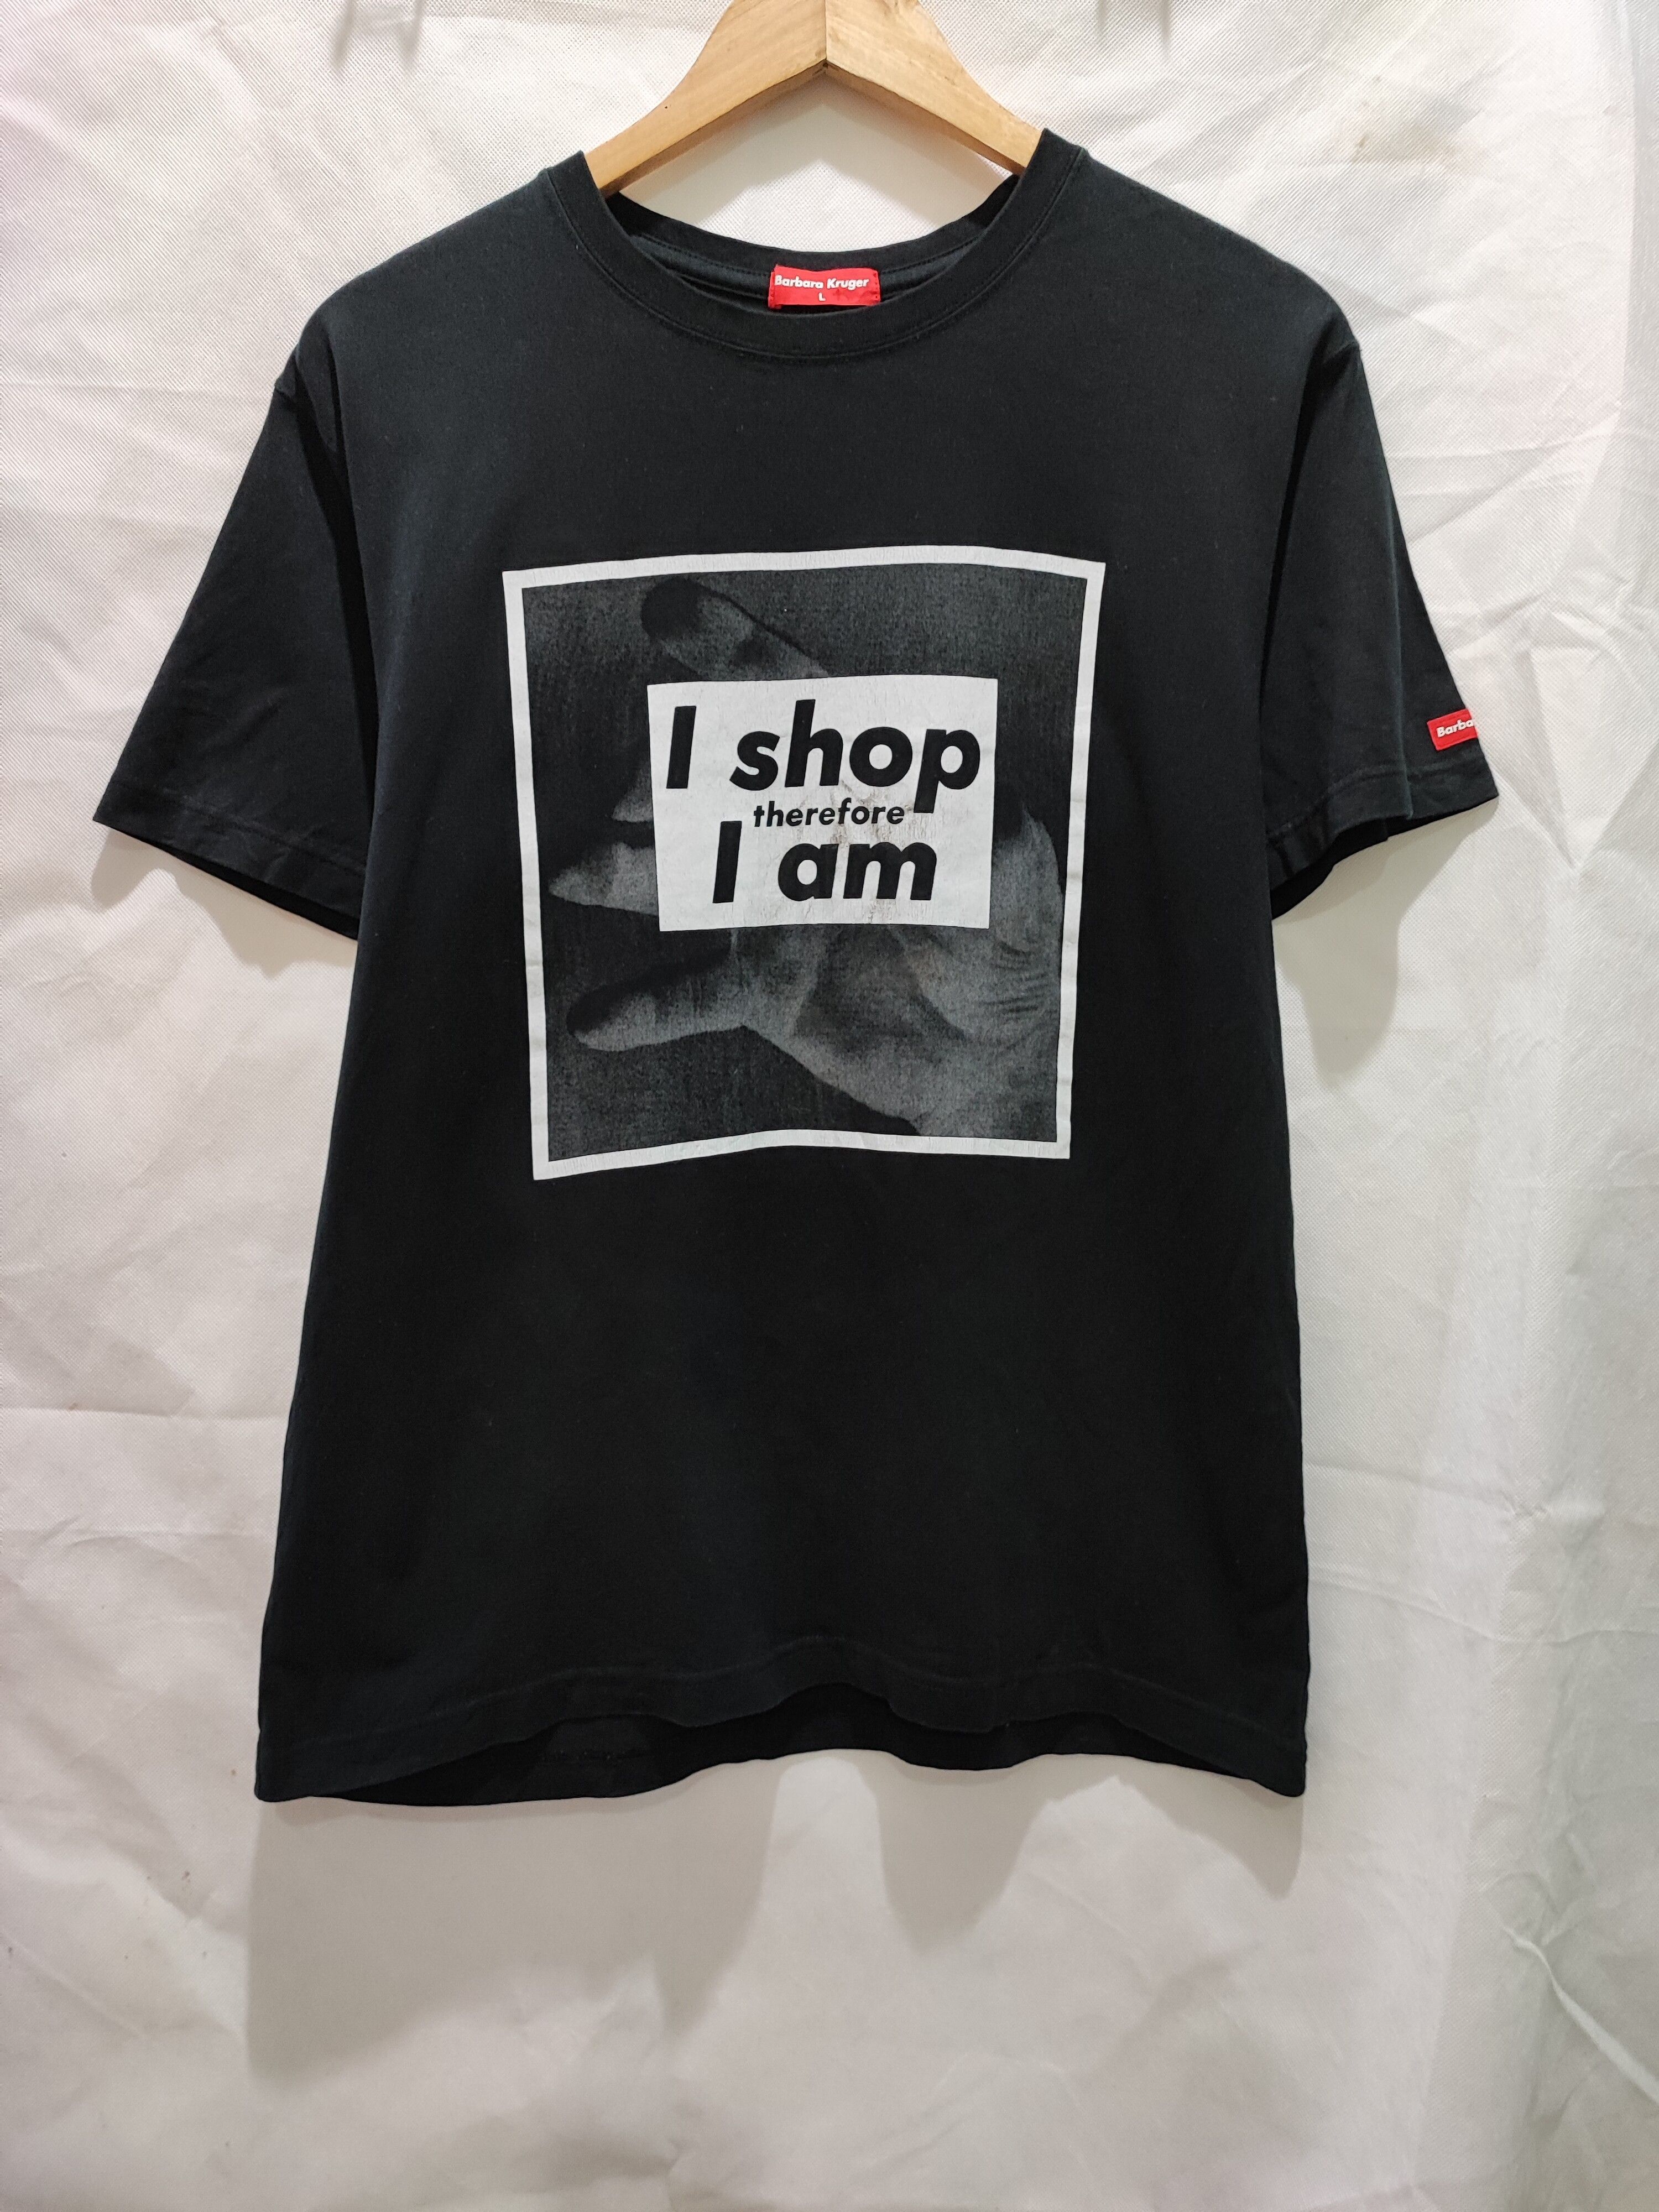 Uniqlo Rare!!! Vintage Barbara Kruger Art I Shop Therefore Tshirt Size L / US 10 / IT 46 - 1 Preview